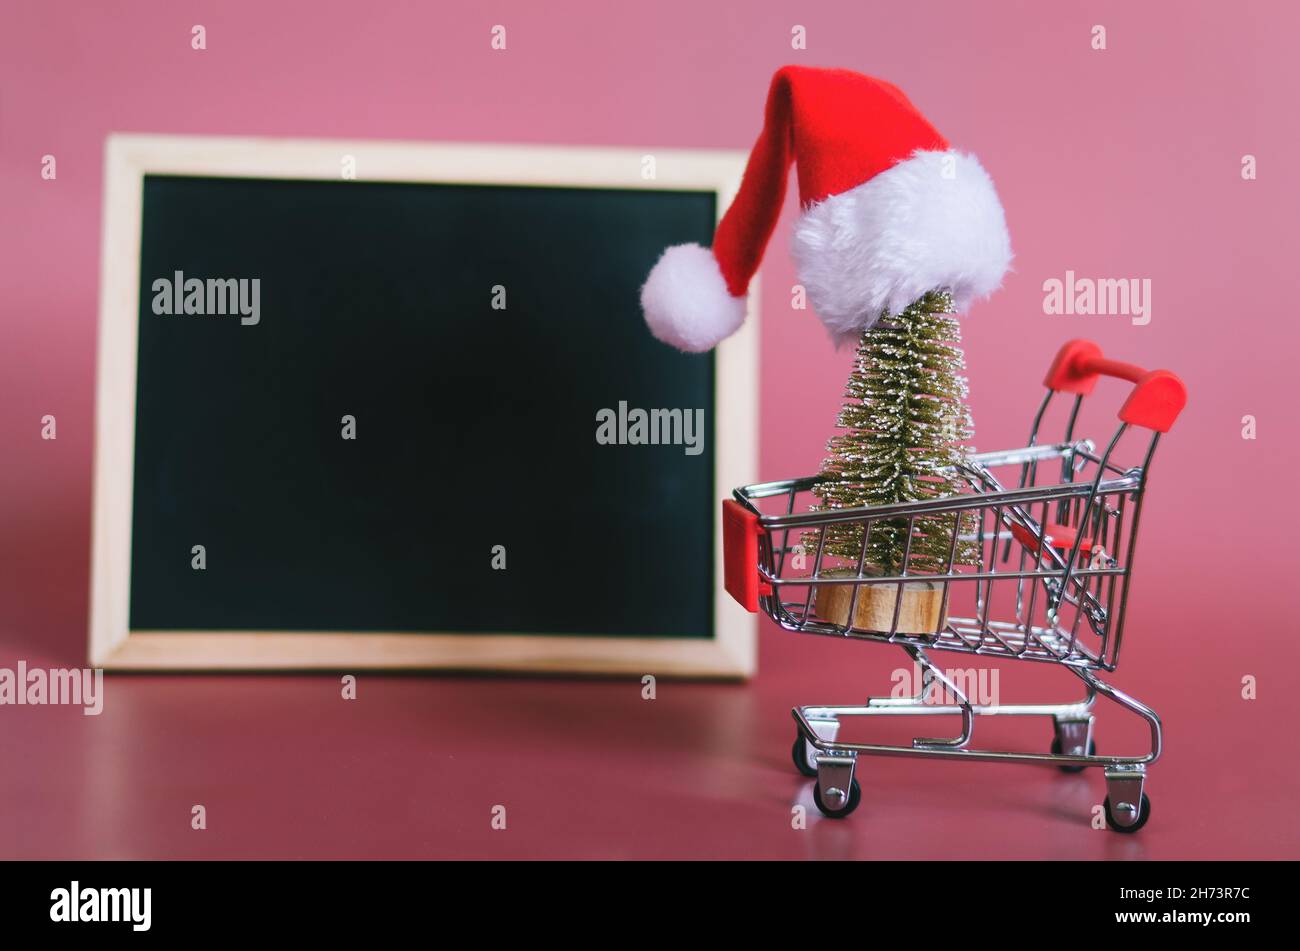 Christmas flat lay on red background with place for text. Christmas hat, toy tree, shopping trolley and a writing board. Resolutions, shopping, plan Stock Photo